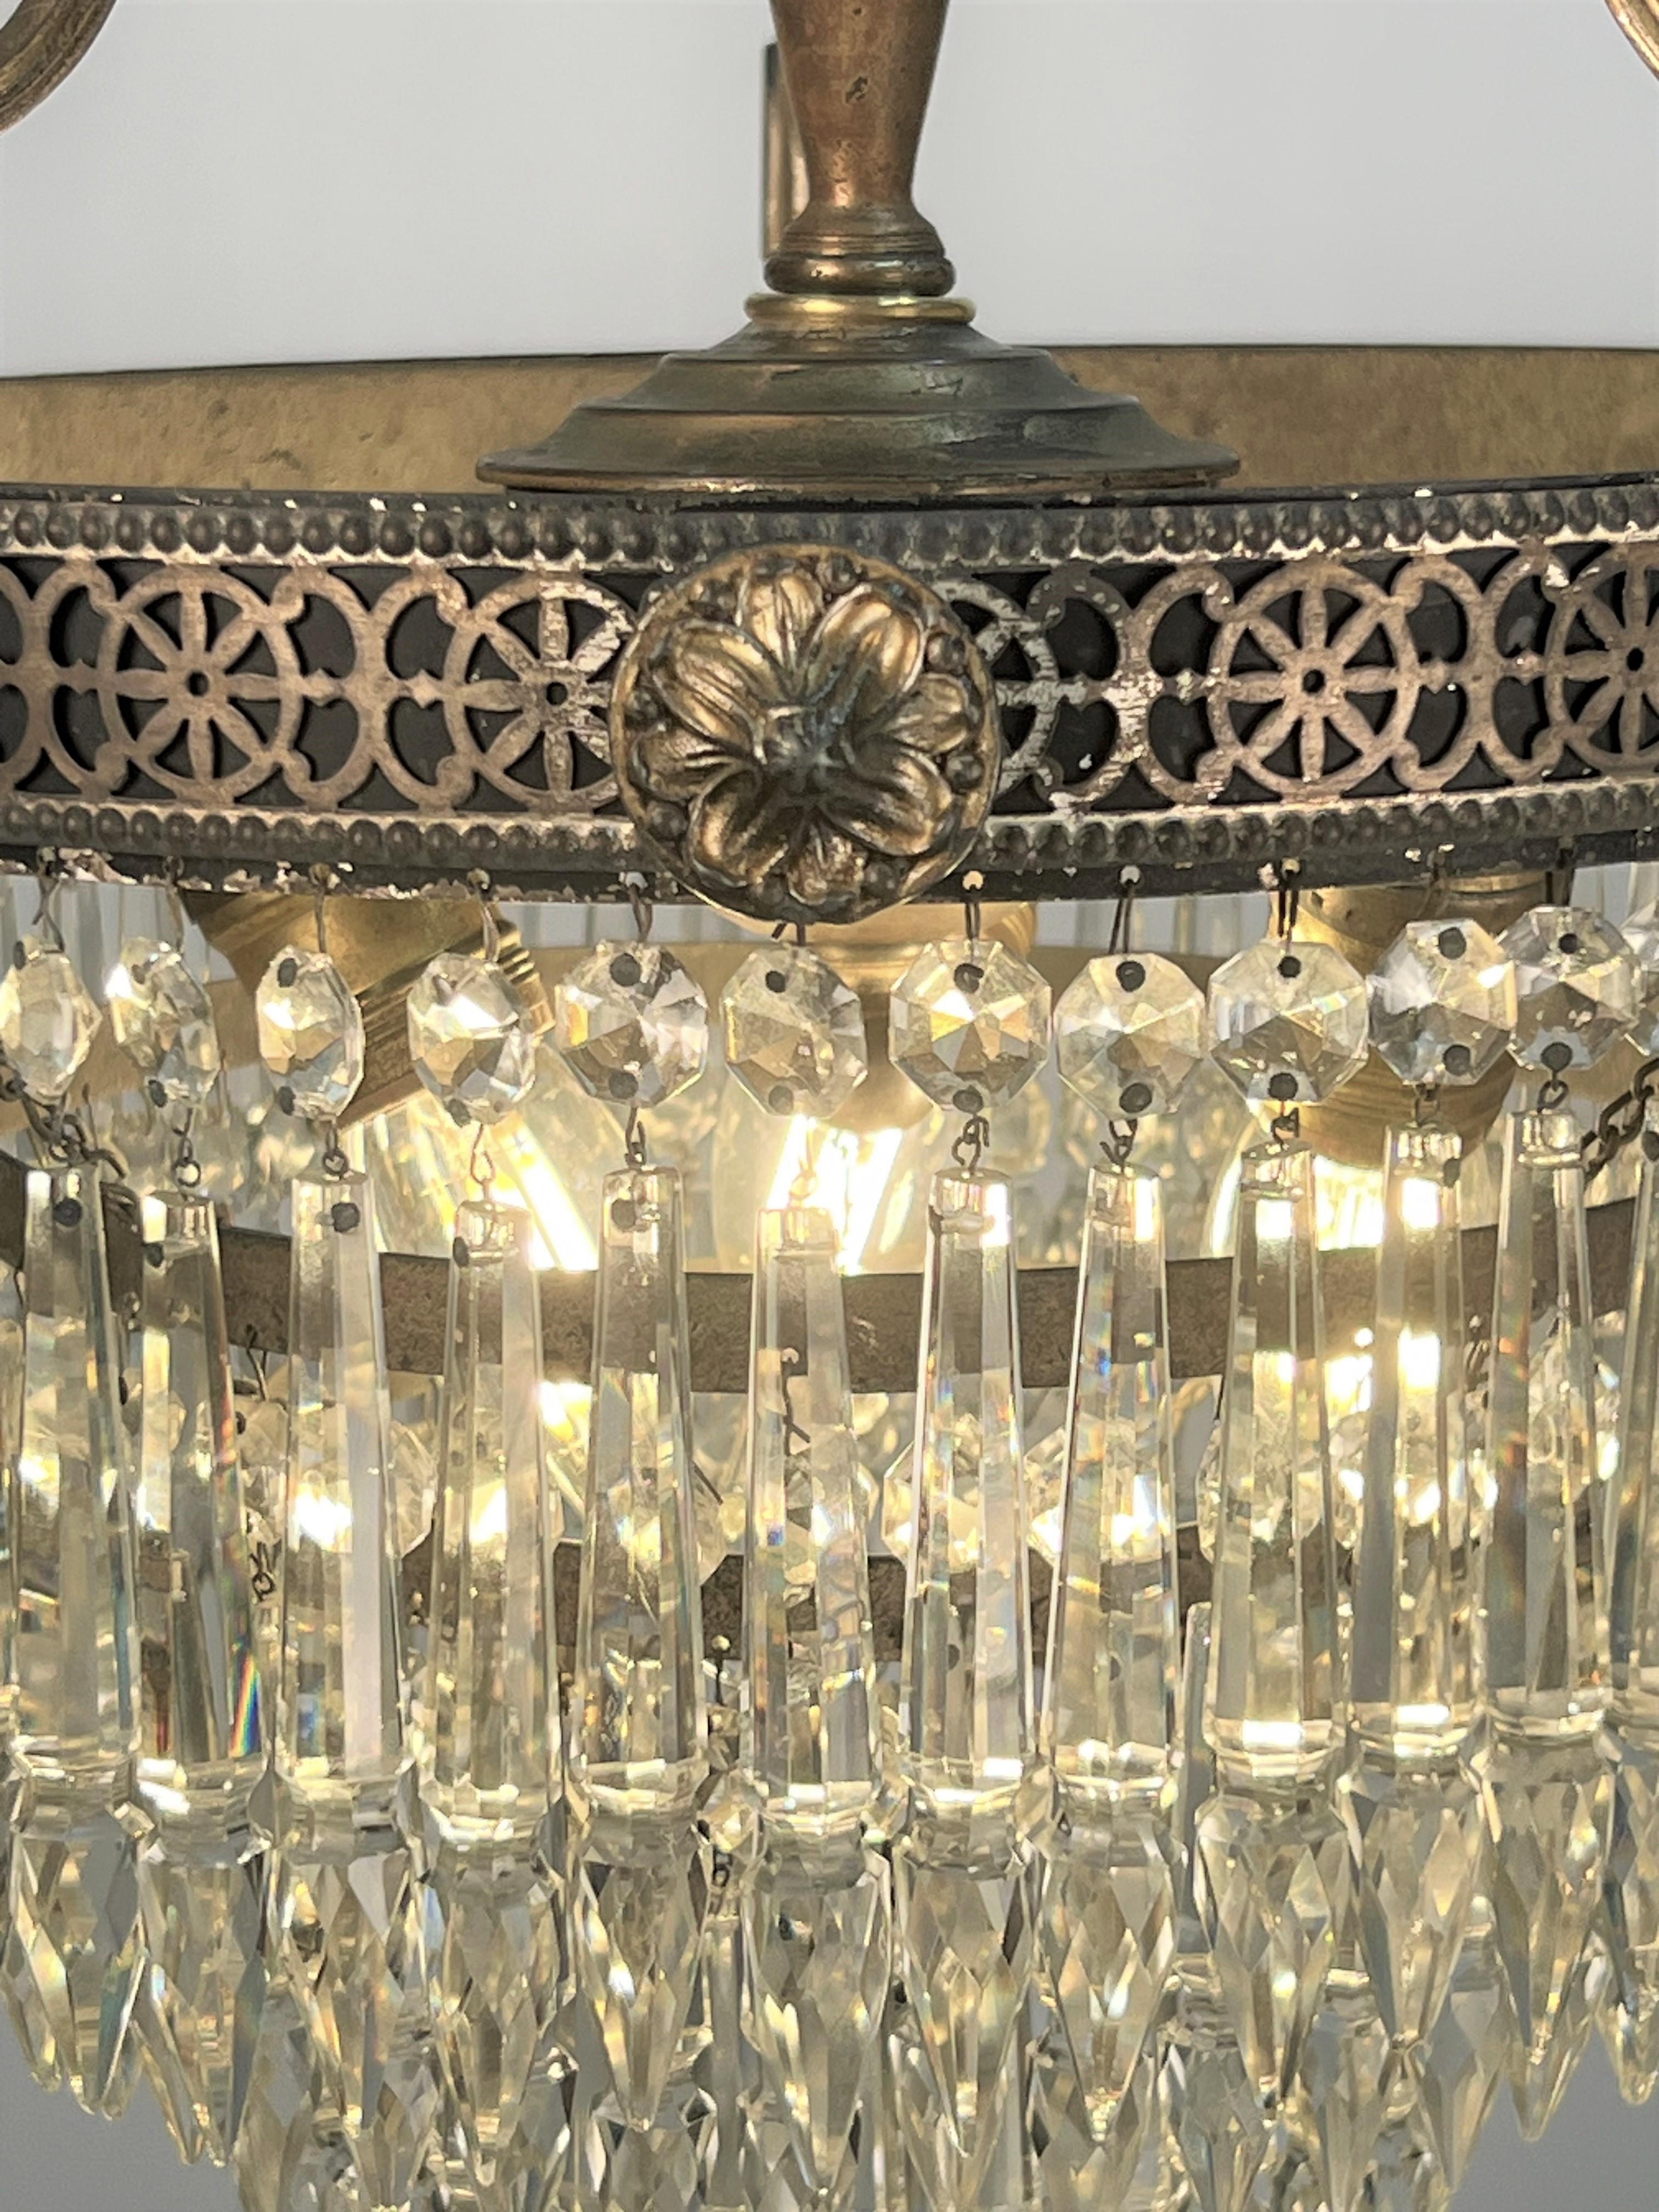 Cast 1920's Decorative Crystal and Brass Chandelier